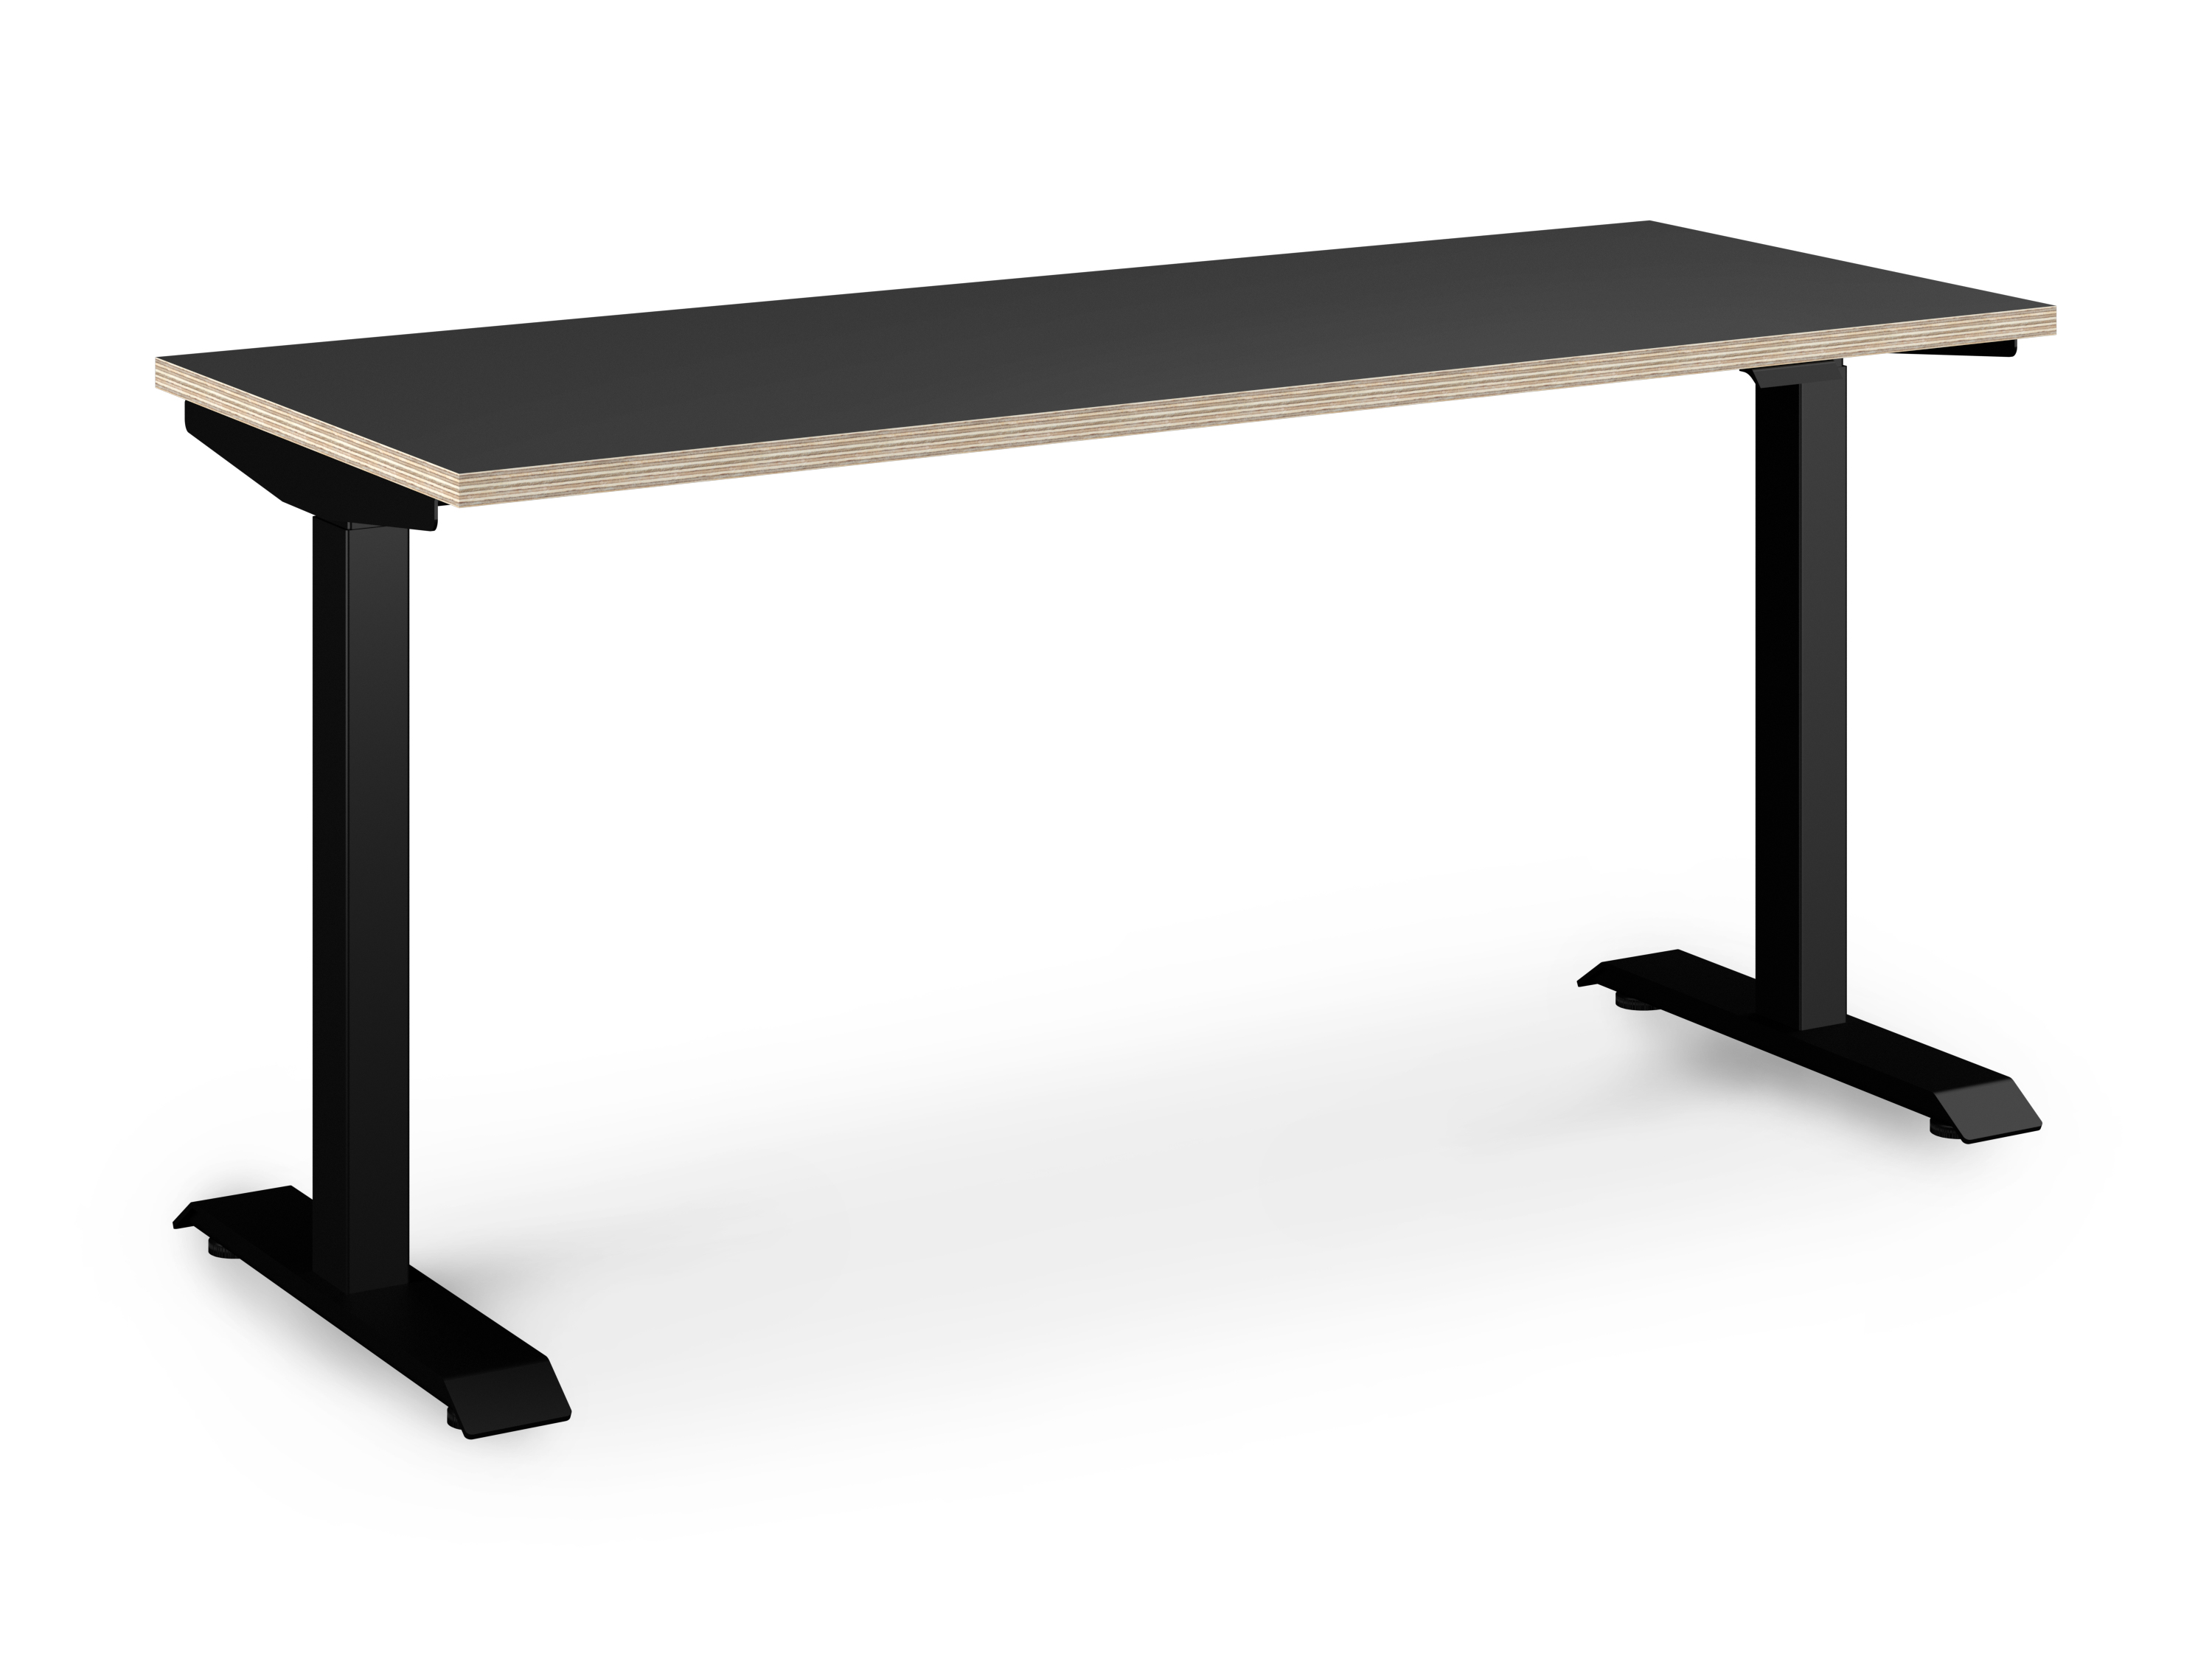 WS - Sit Stand Solo - Black Frame, Anthracite ply edging